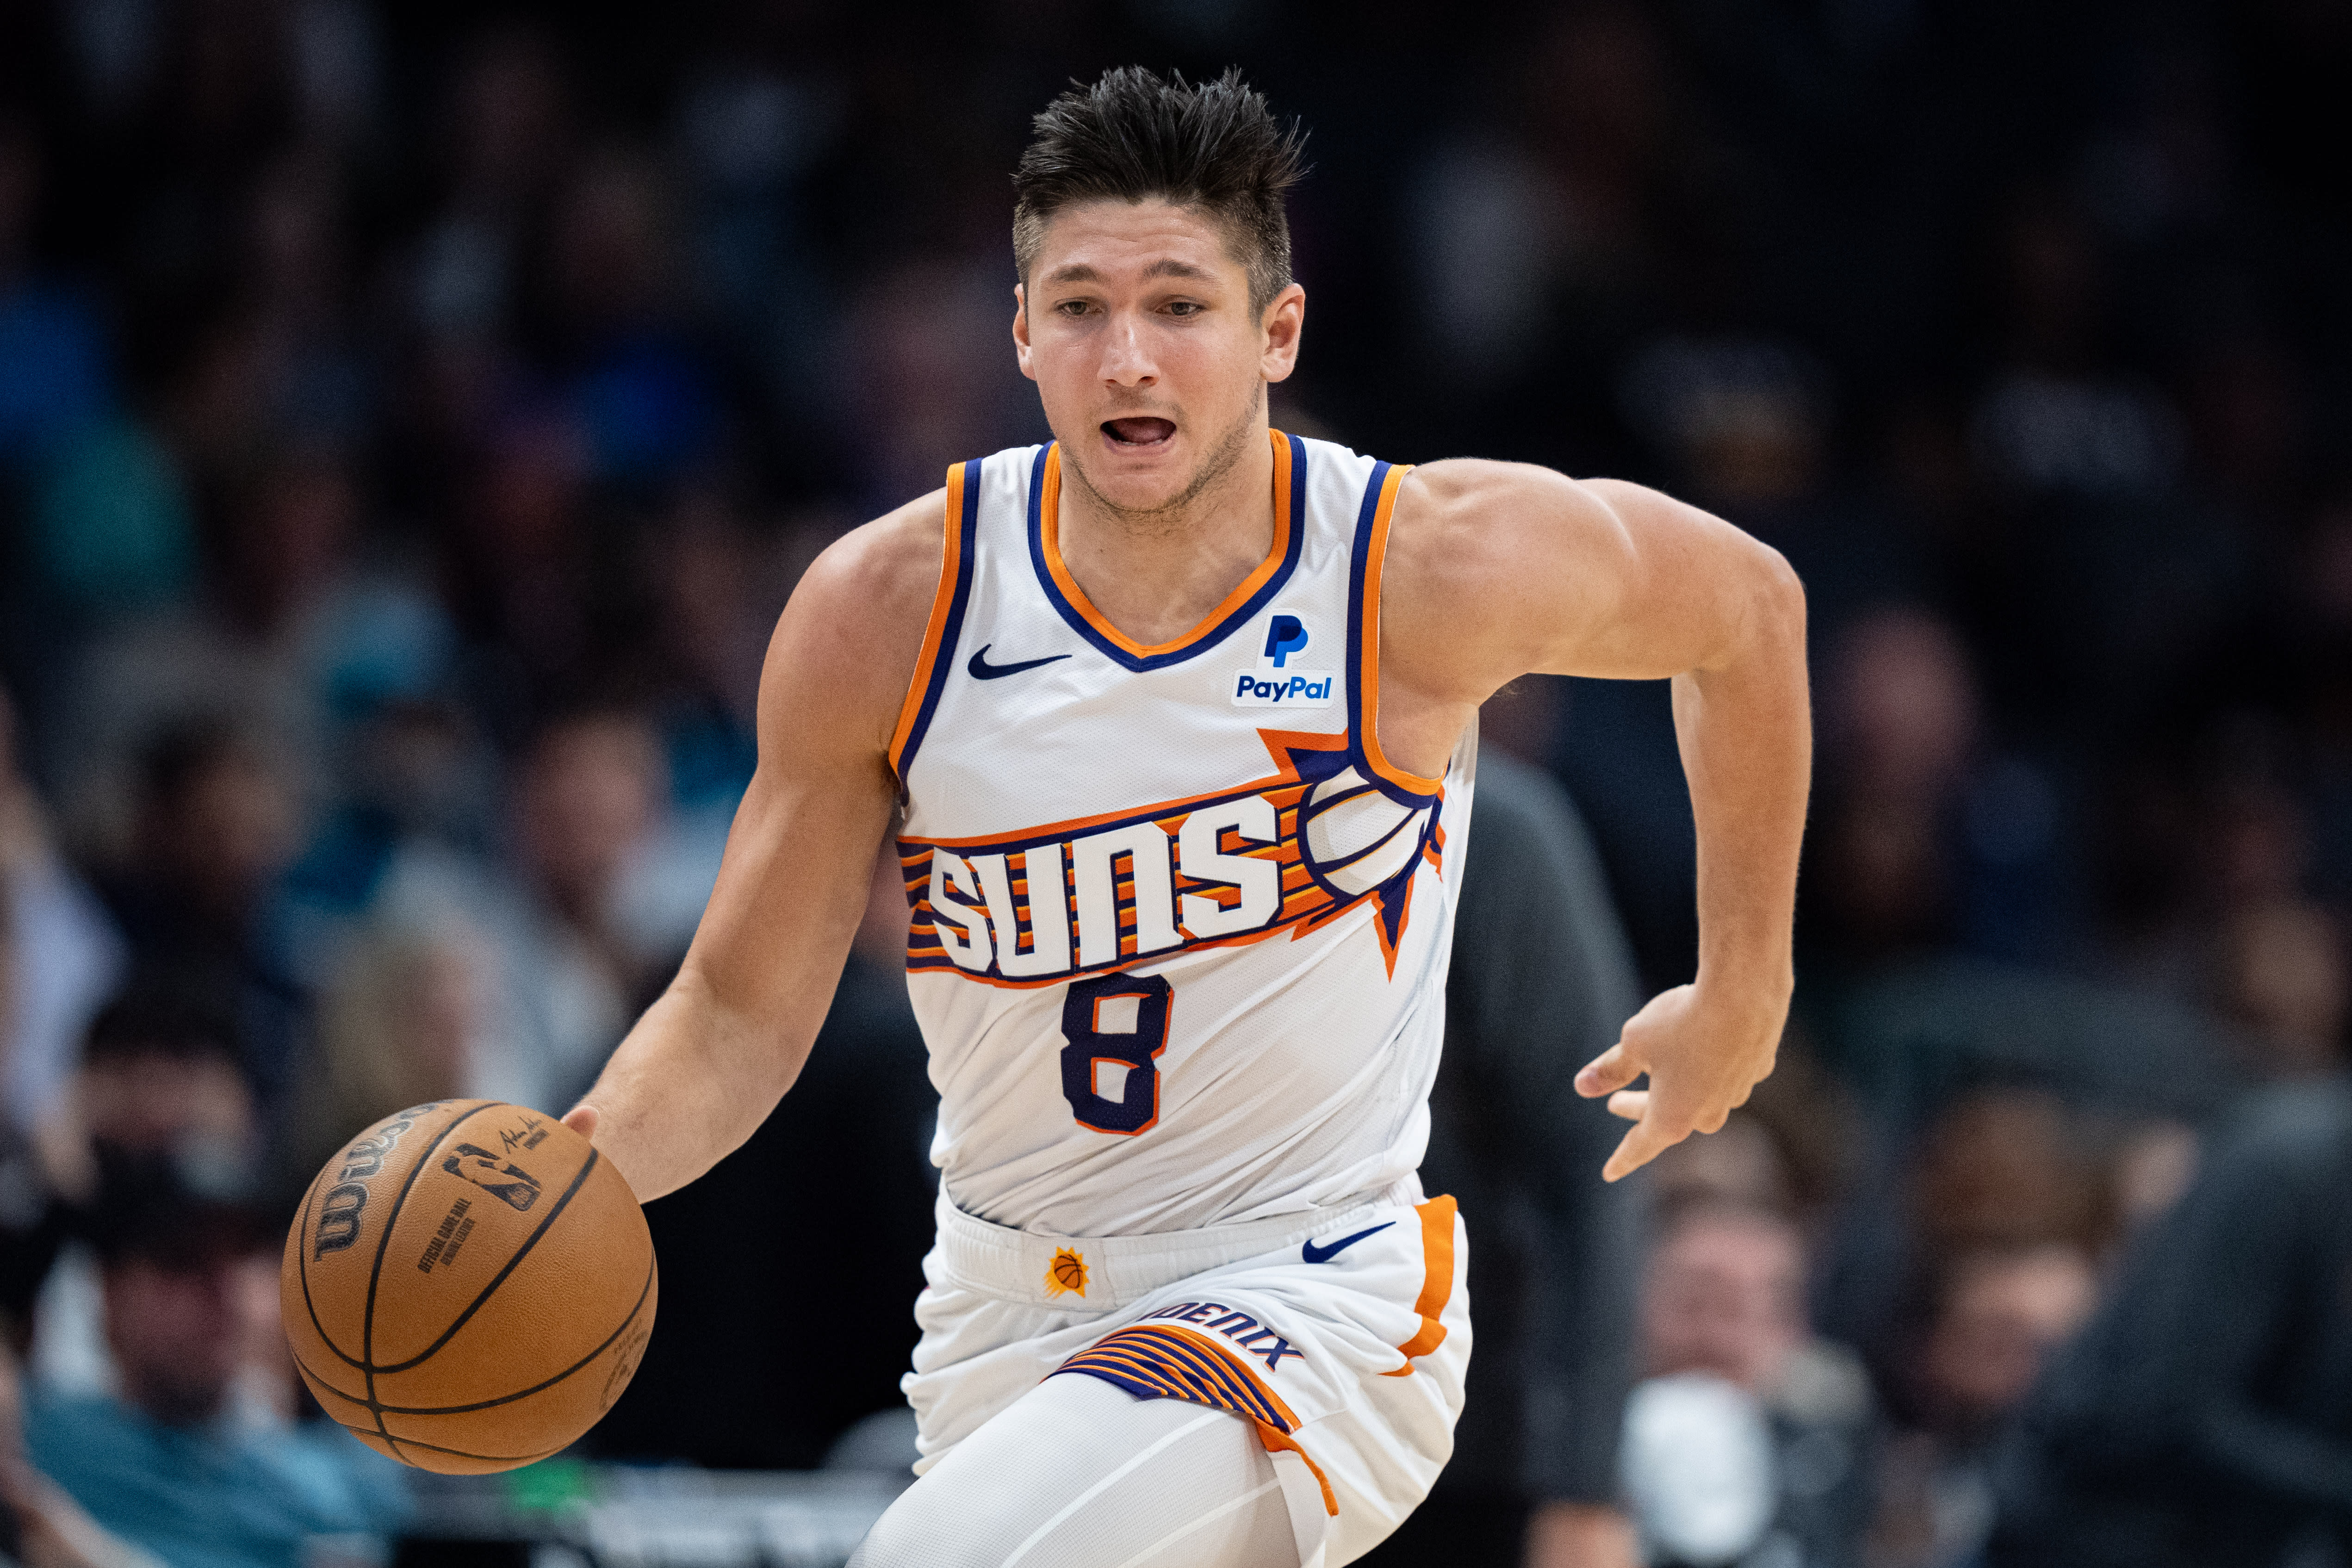 Suns, Grayson Allen reportedly agree to 4-year, $70M contract extension 5 days before playoffs